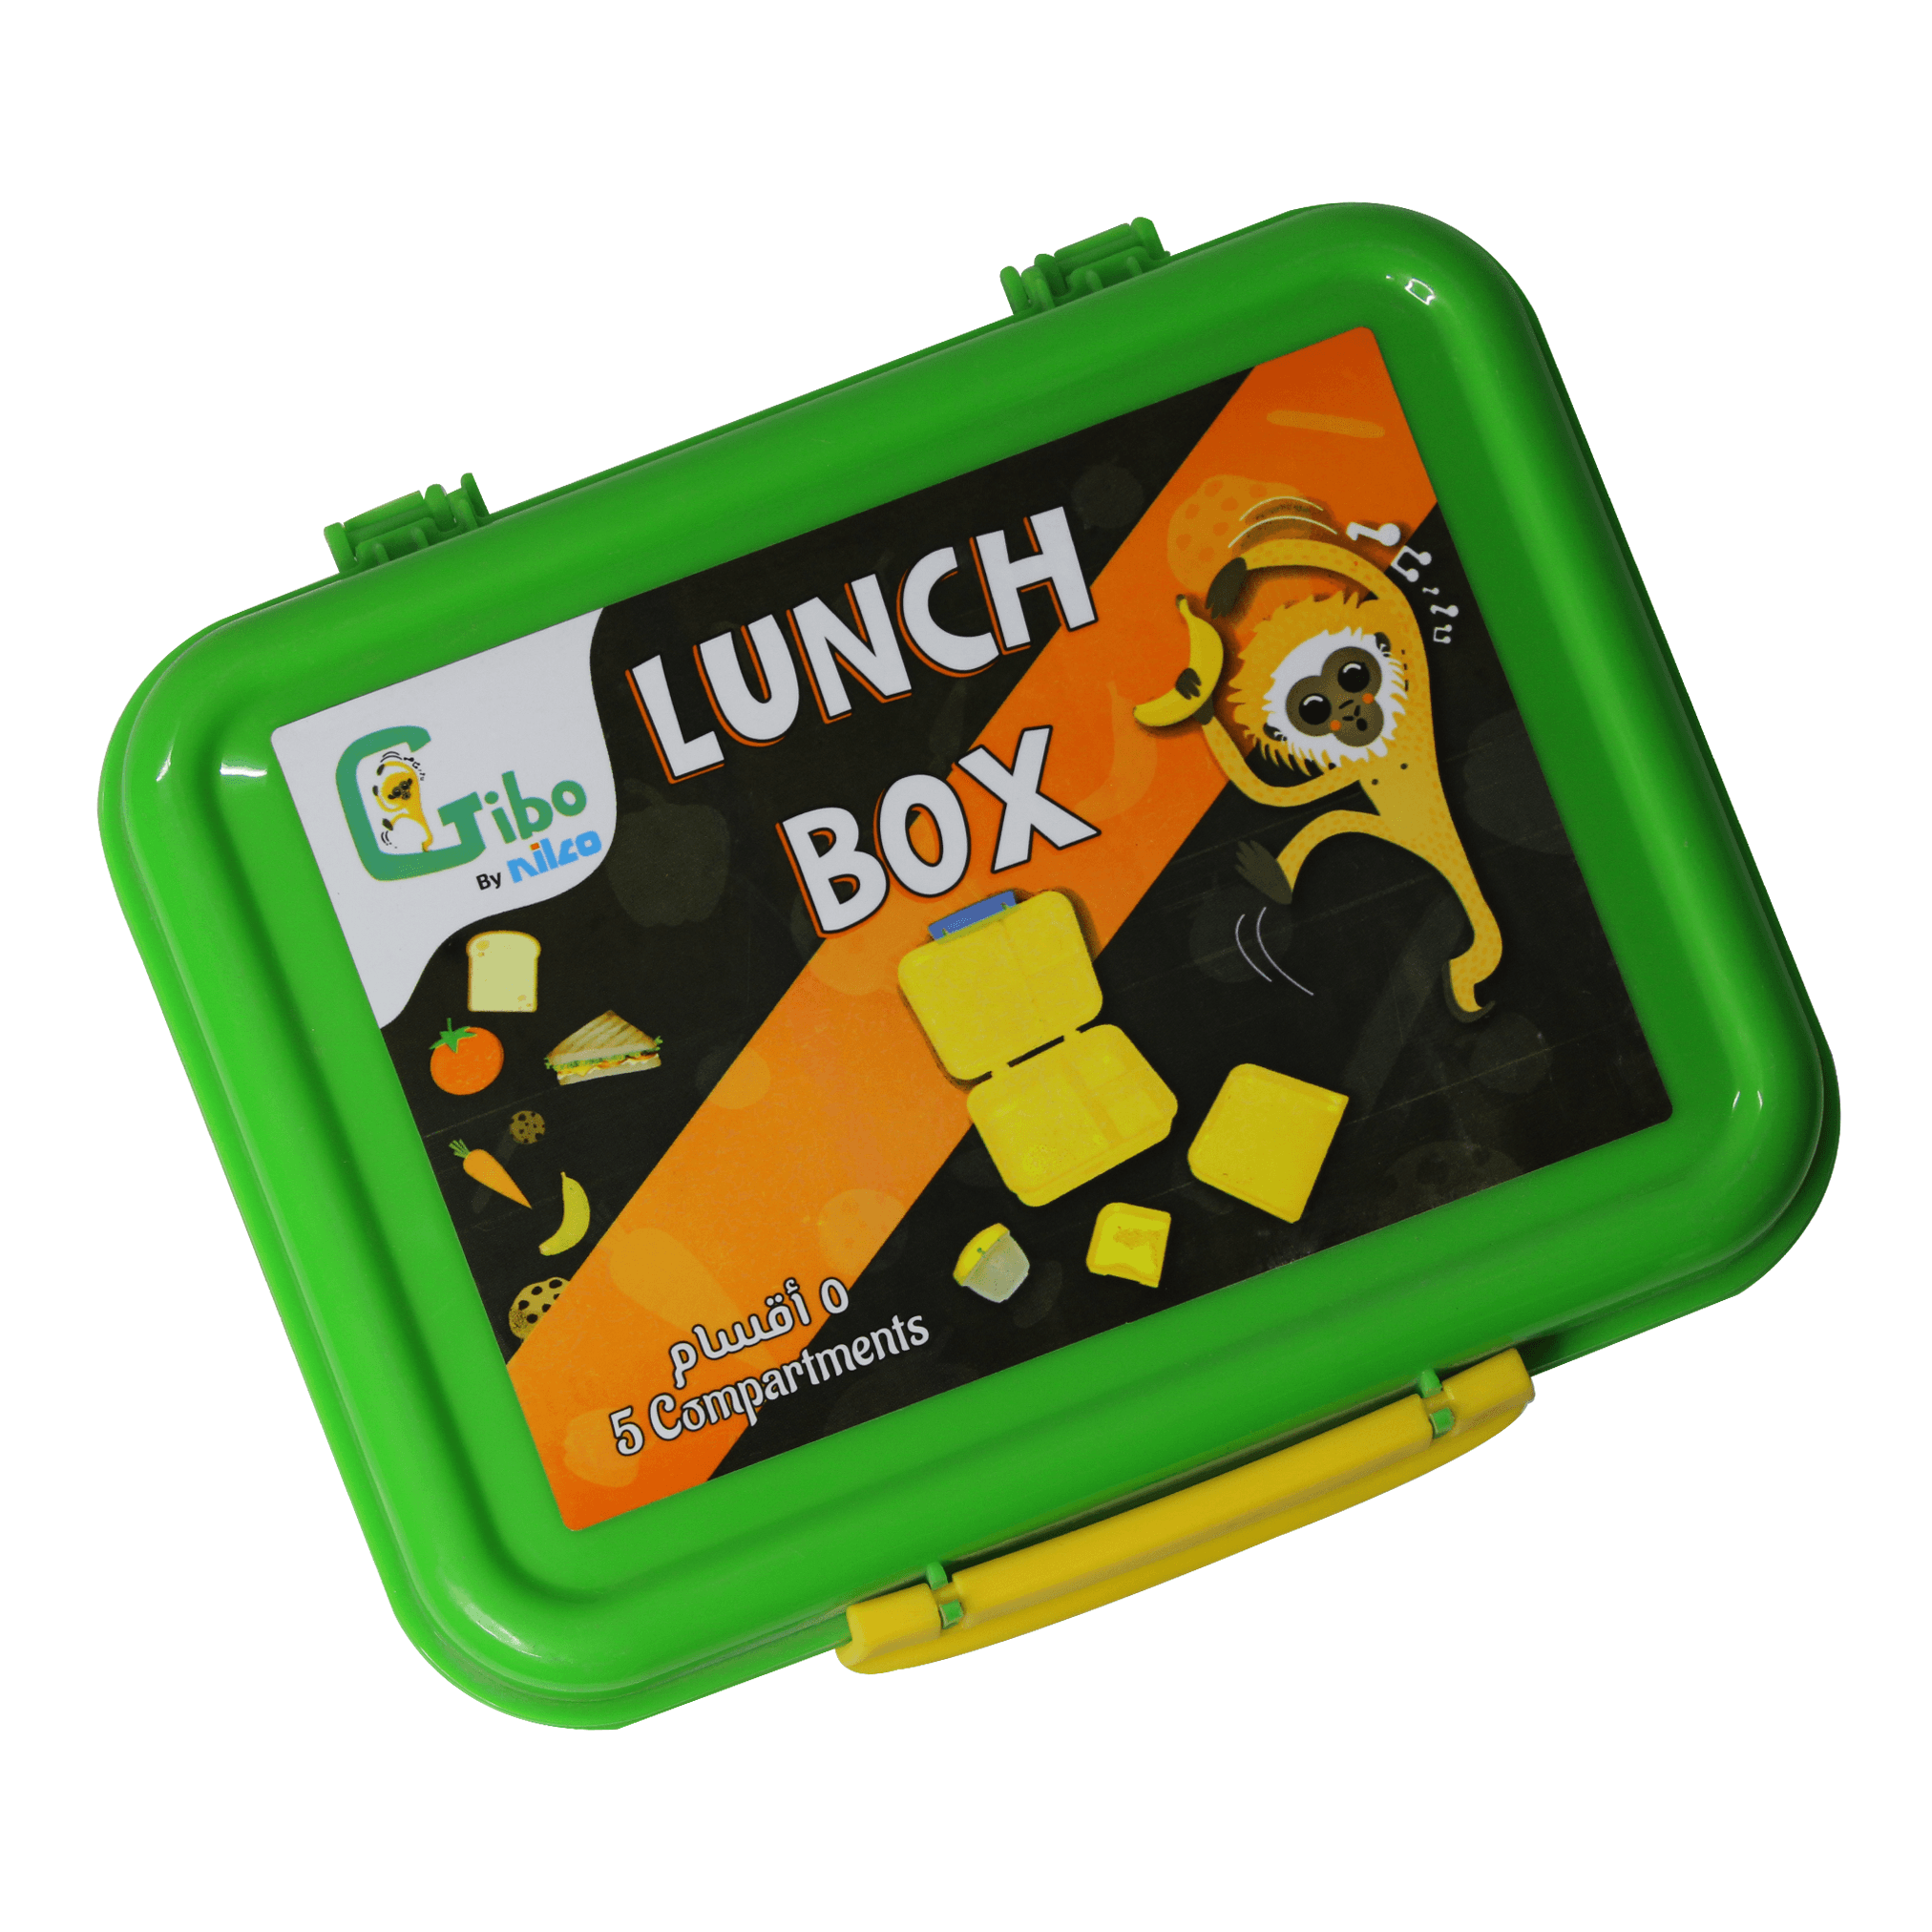 Nilco Lunch Box – Green - BumbleToys - 5-7 Years, Cecil, Girls, Pre-Order, School Supplies